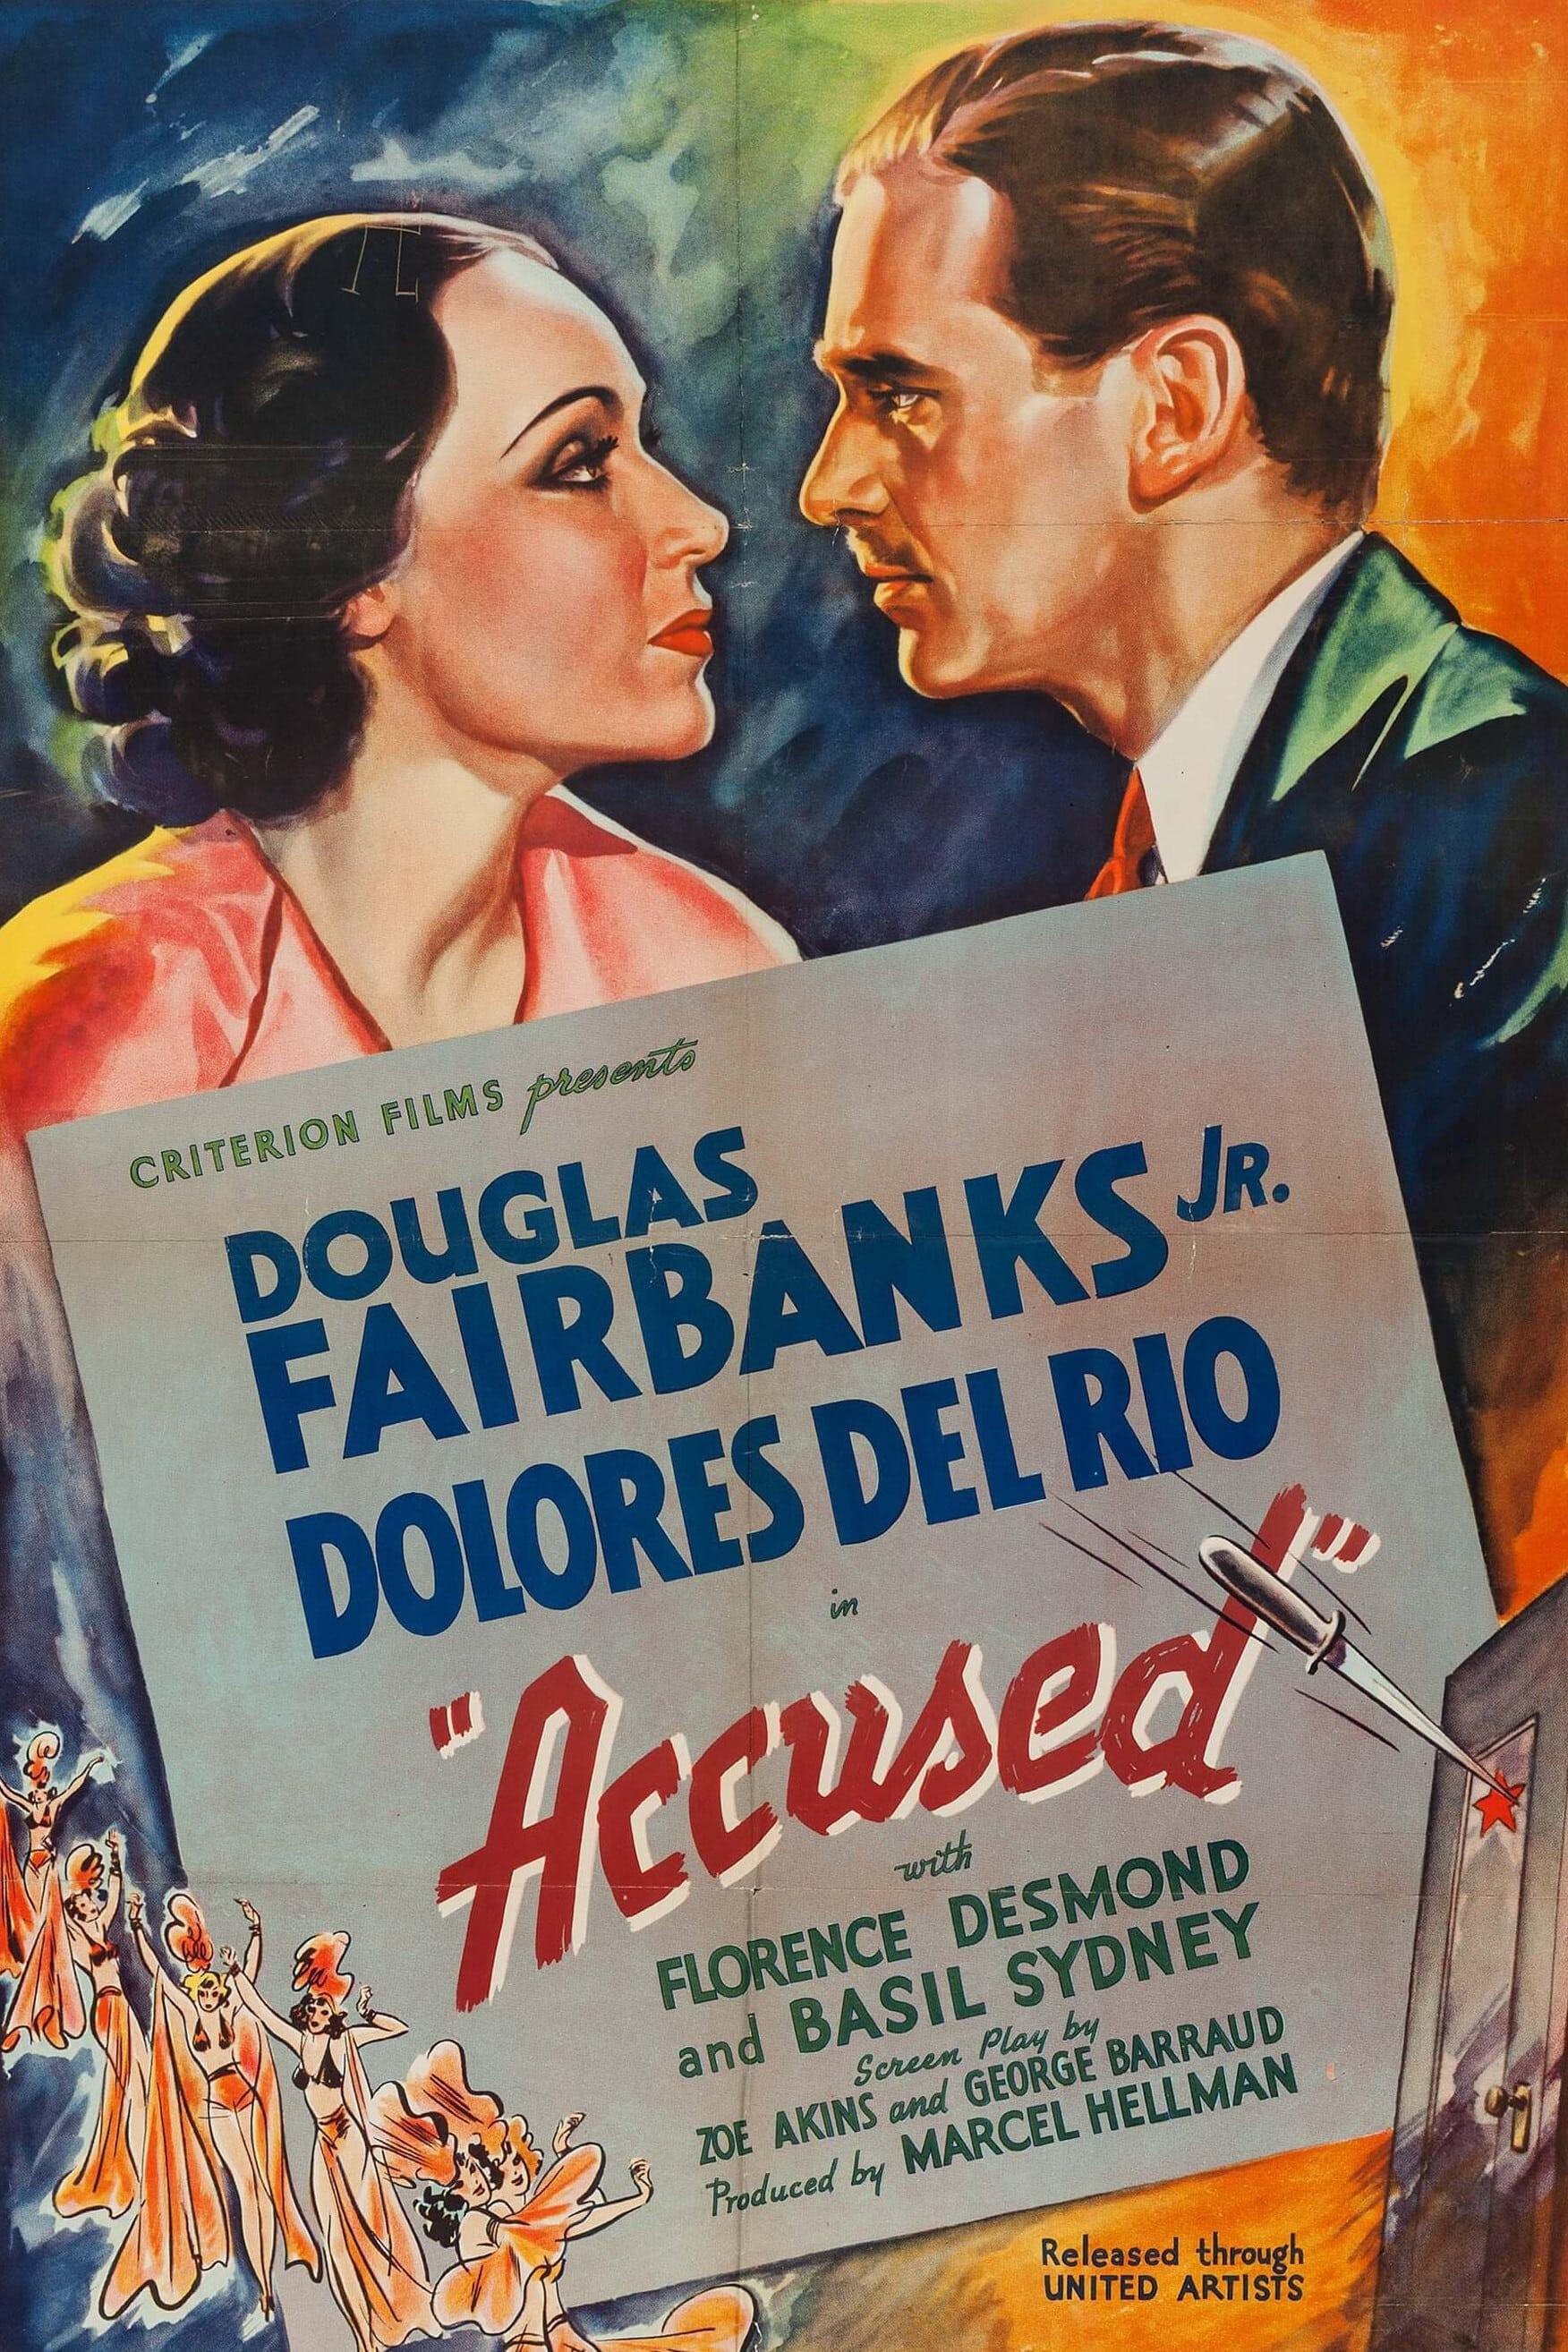 Accused poster